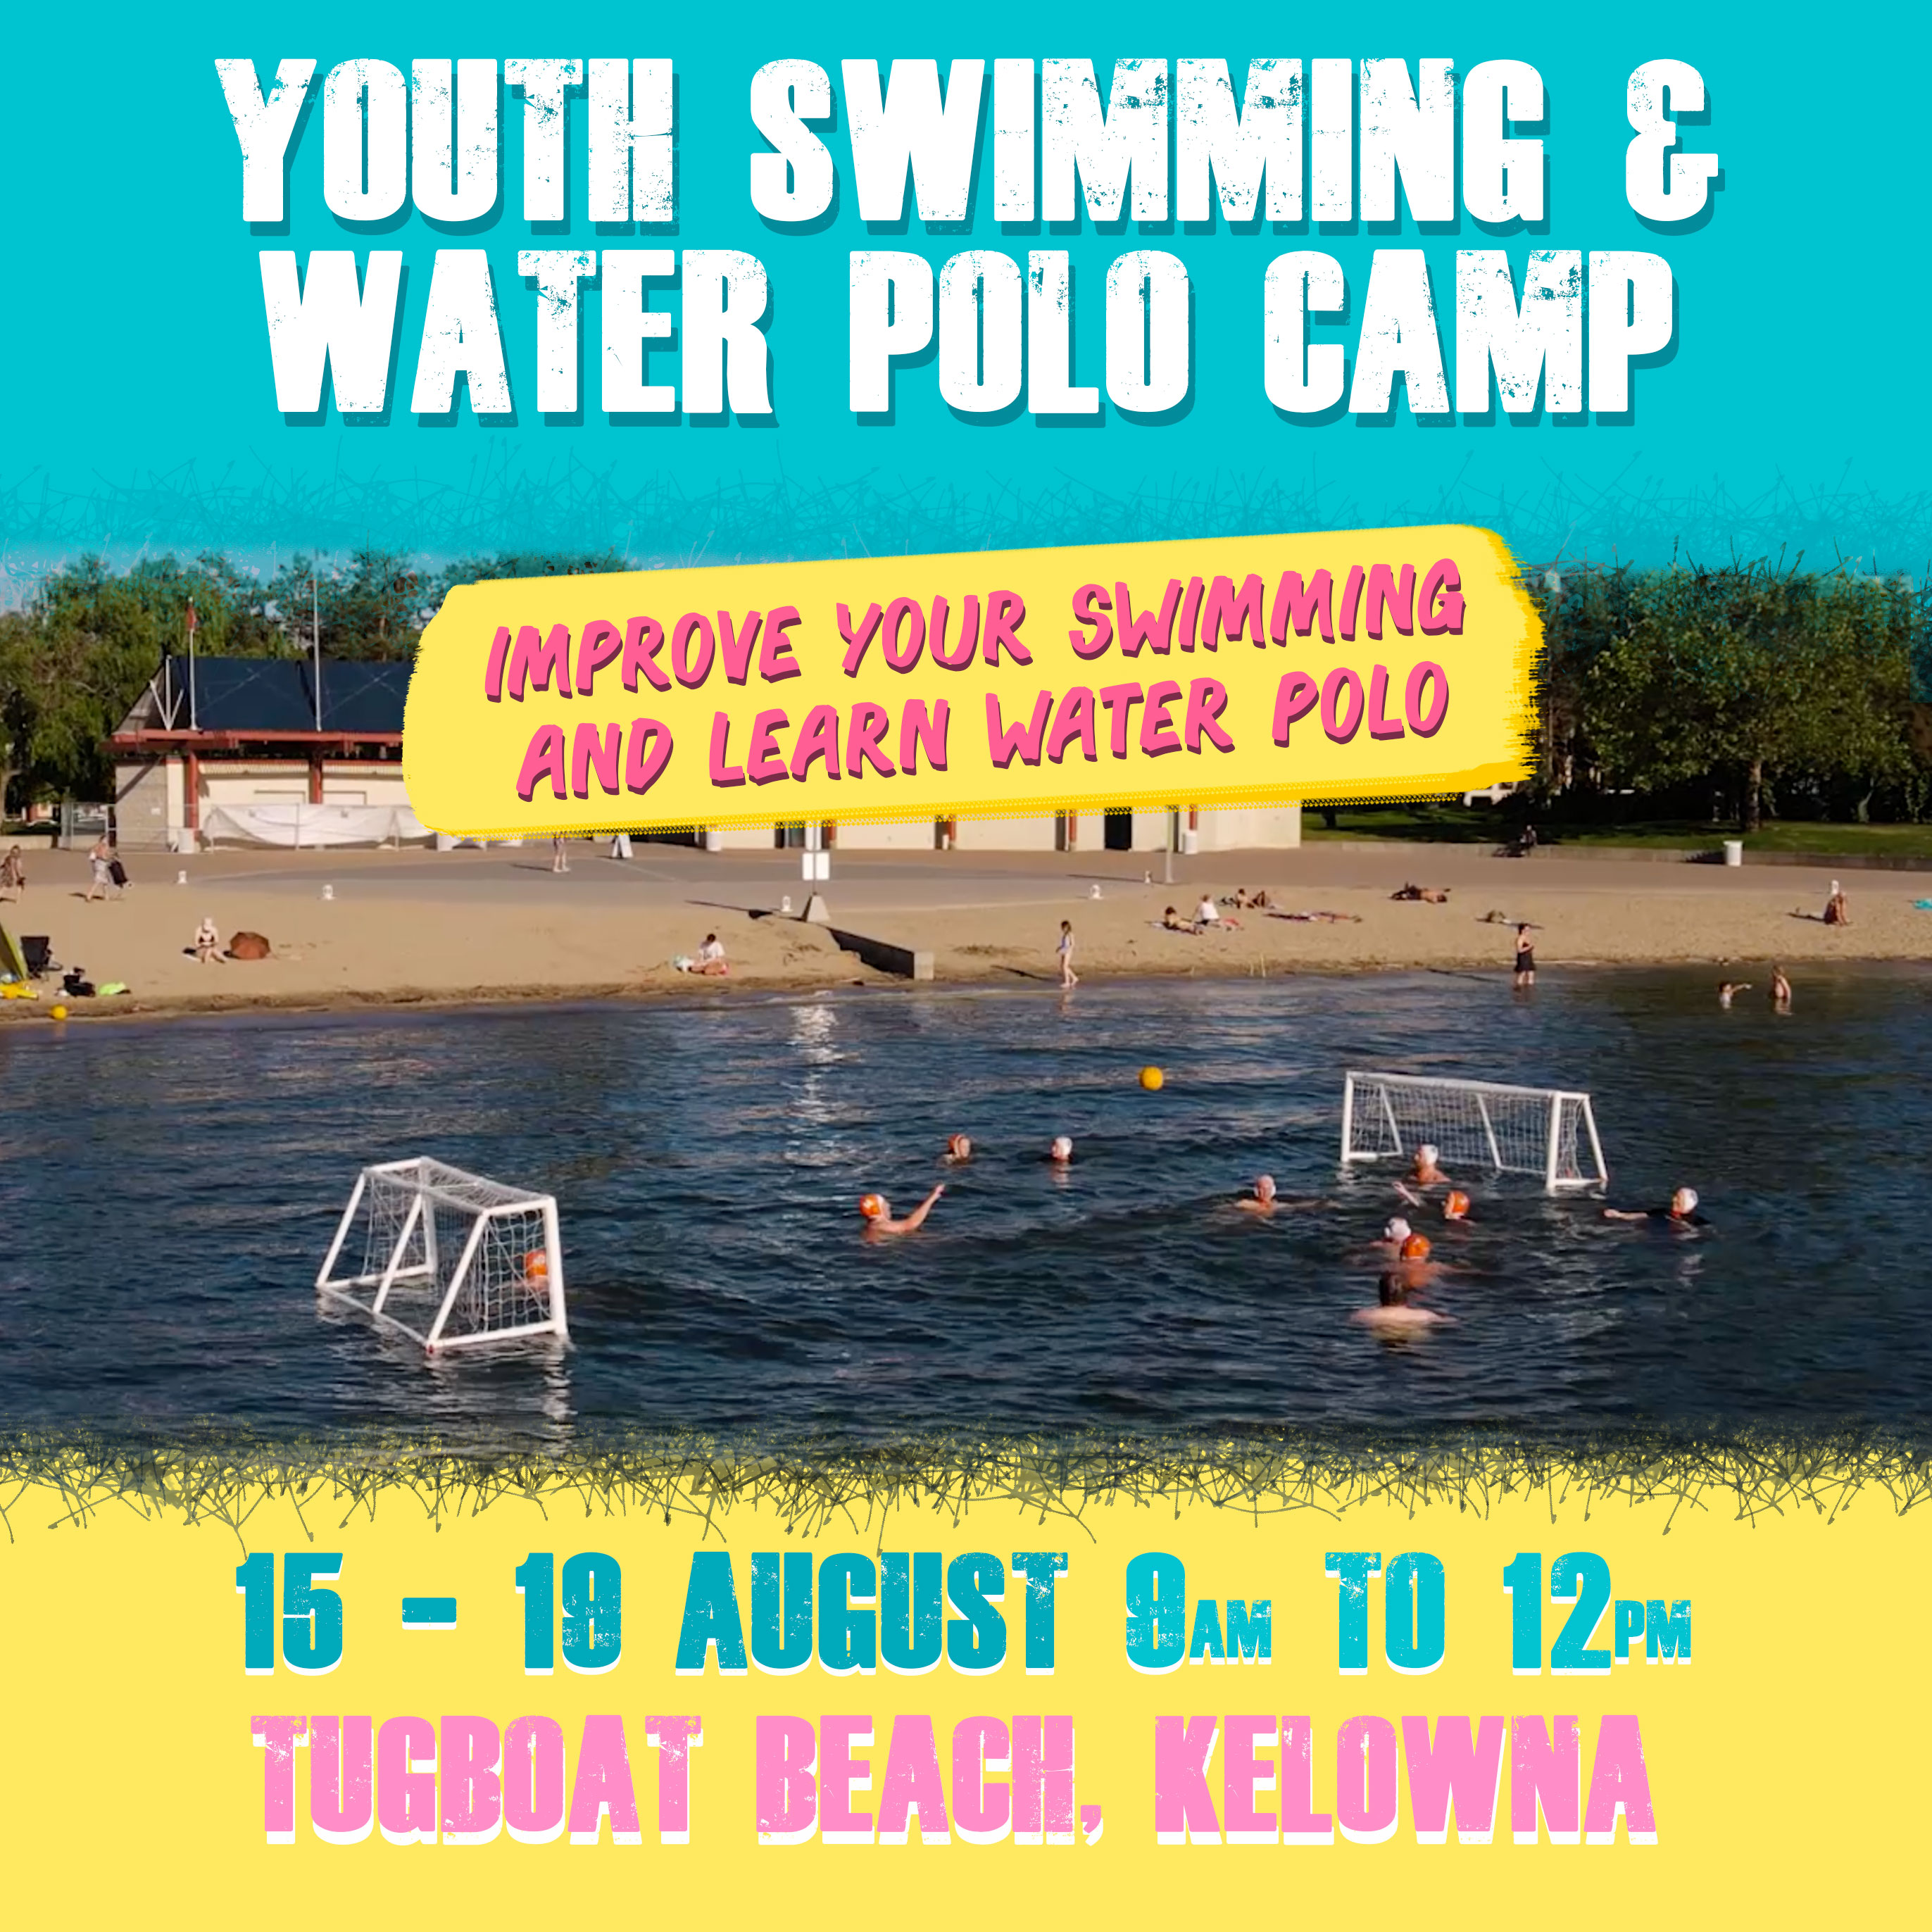 Kelowna Swim Lessons and Water Polo Camp in August 2022